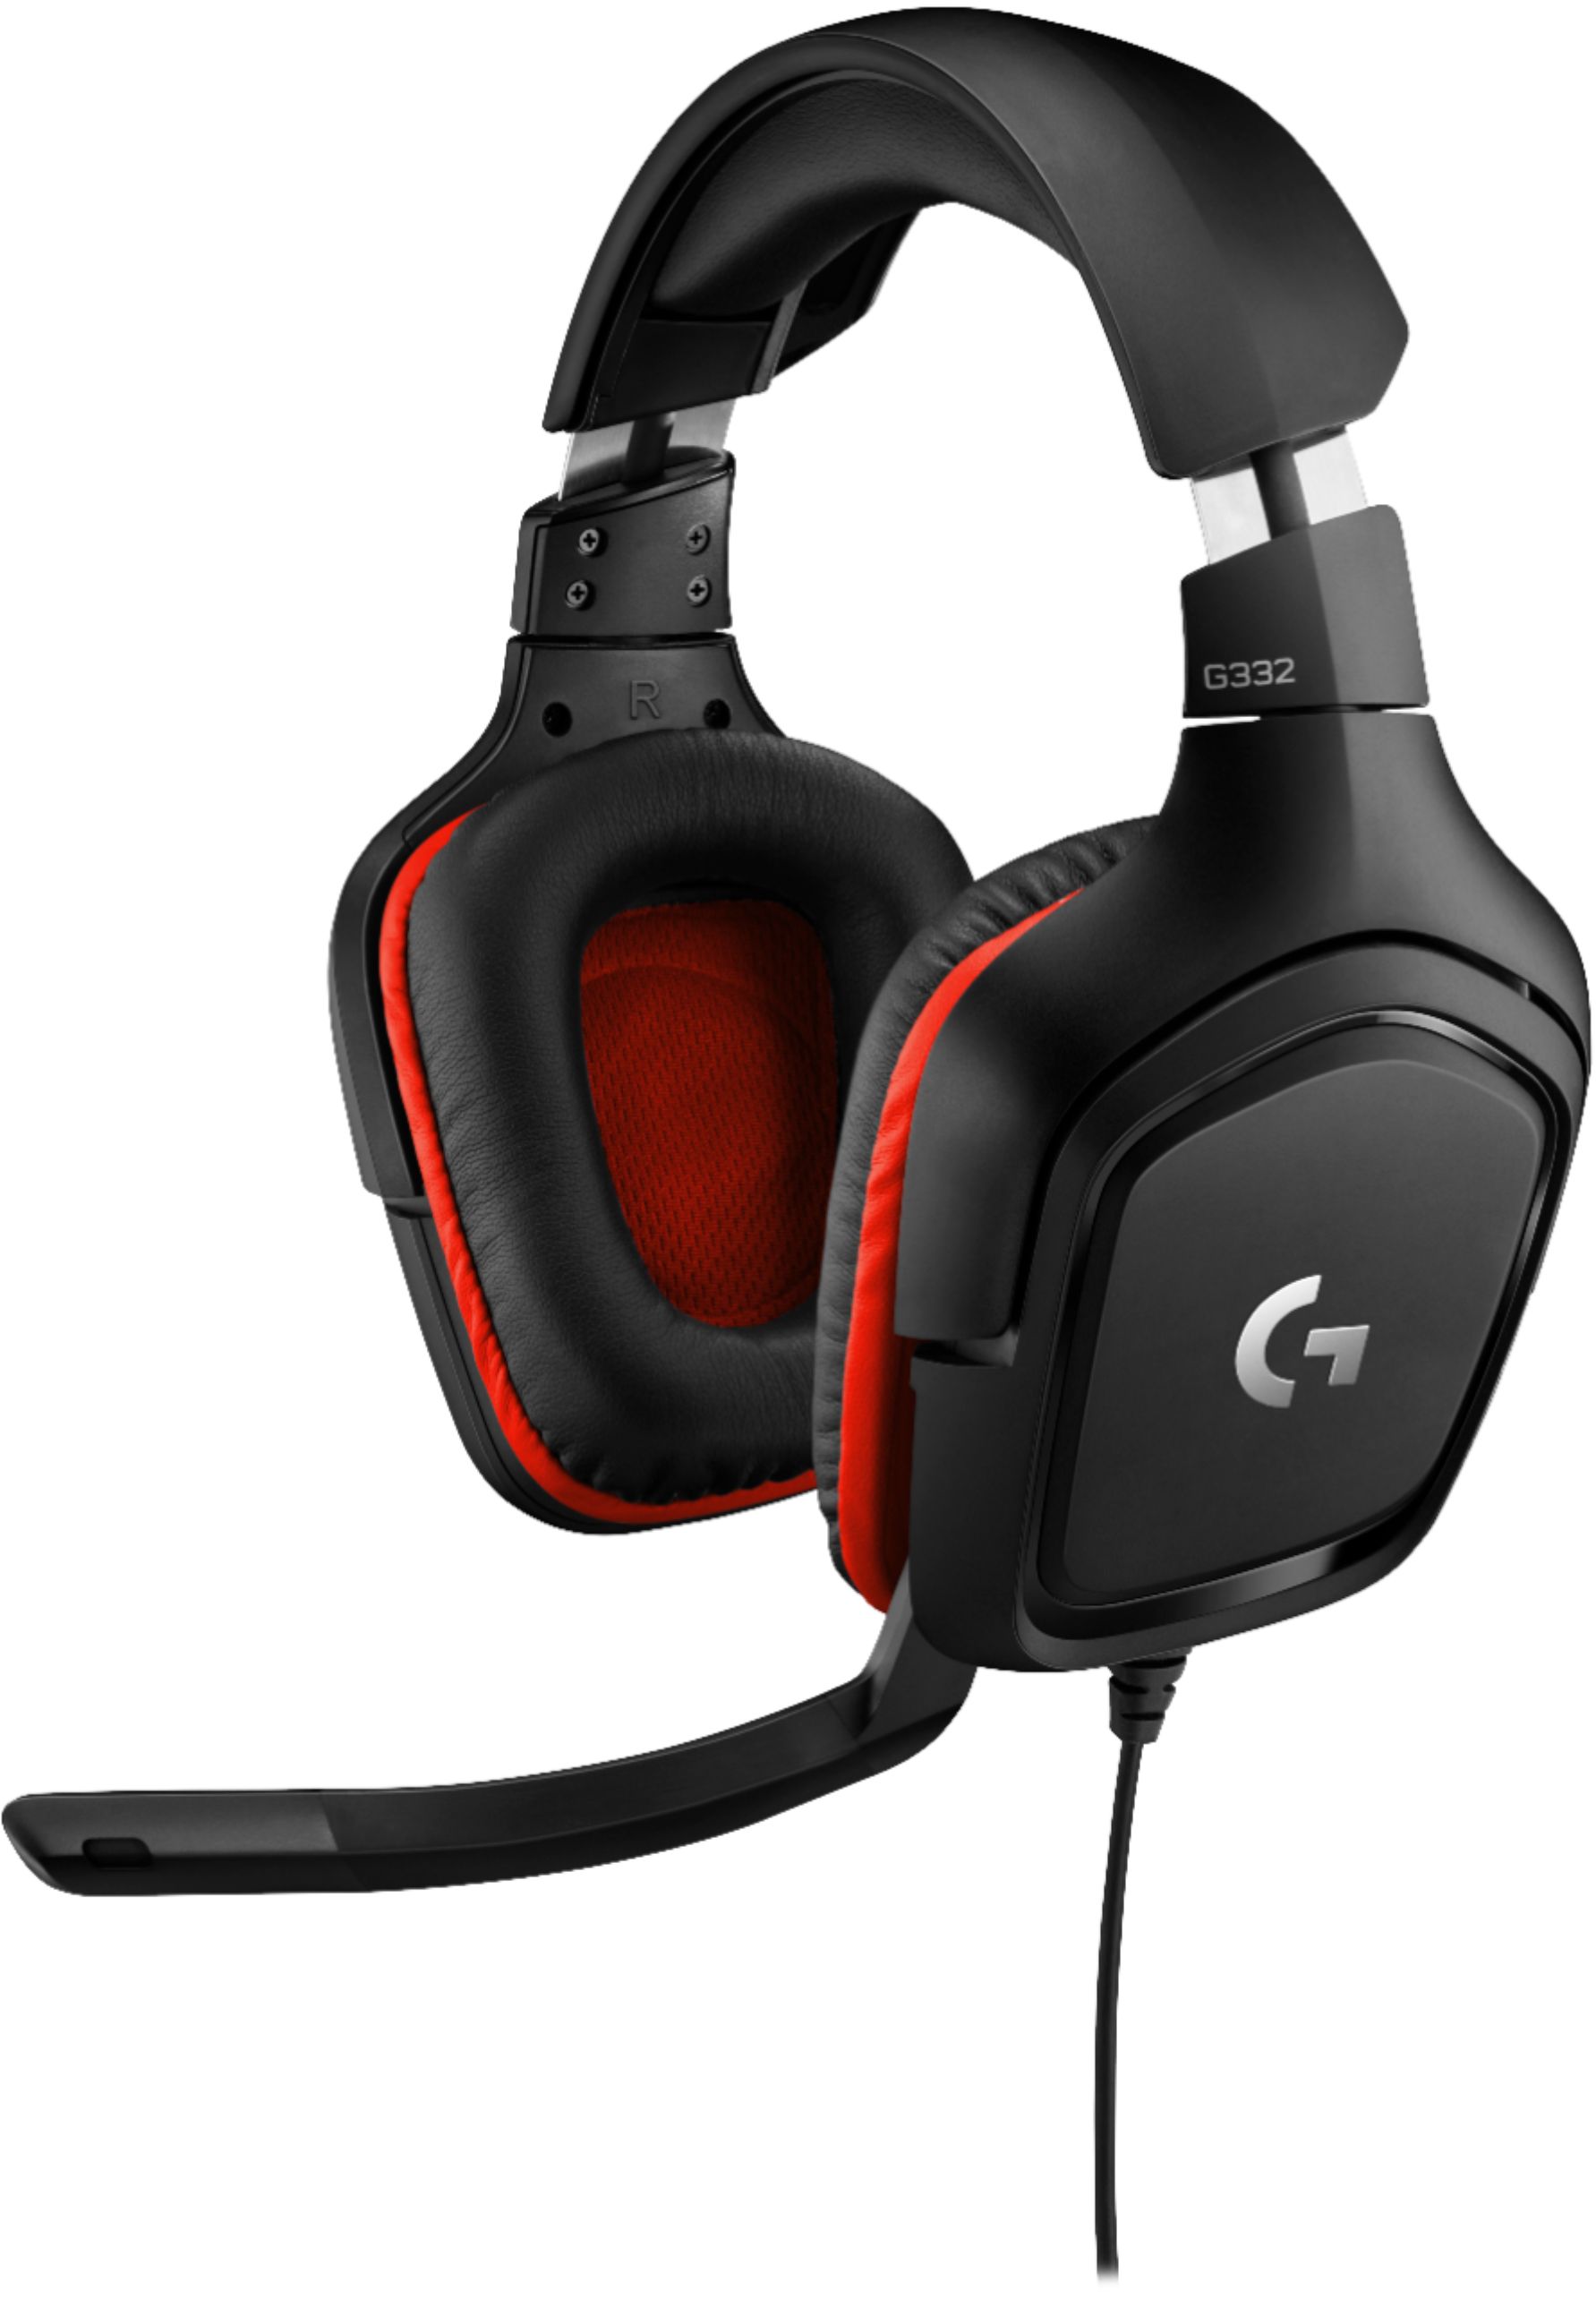 Logitech G332 Wired Gaming Headset for PC Black/Red 981-000755